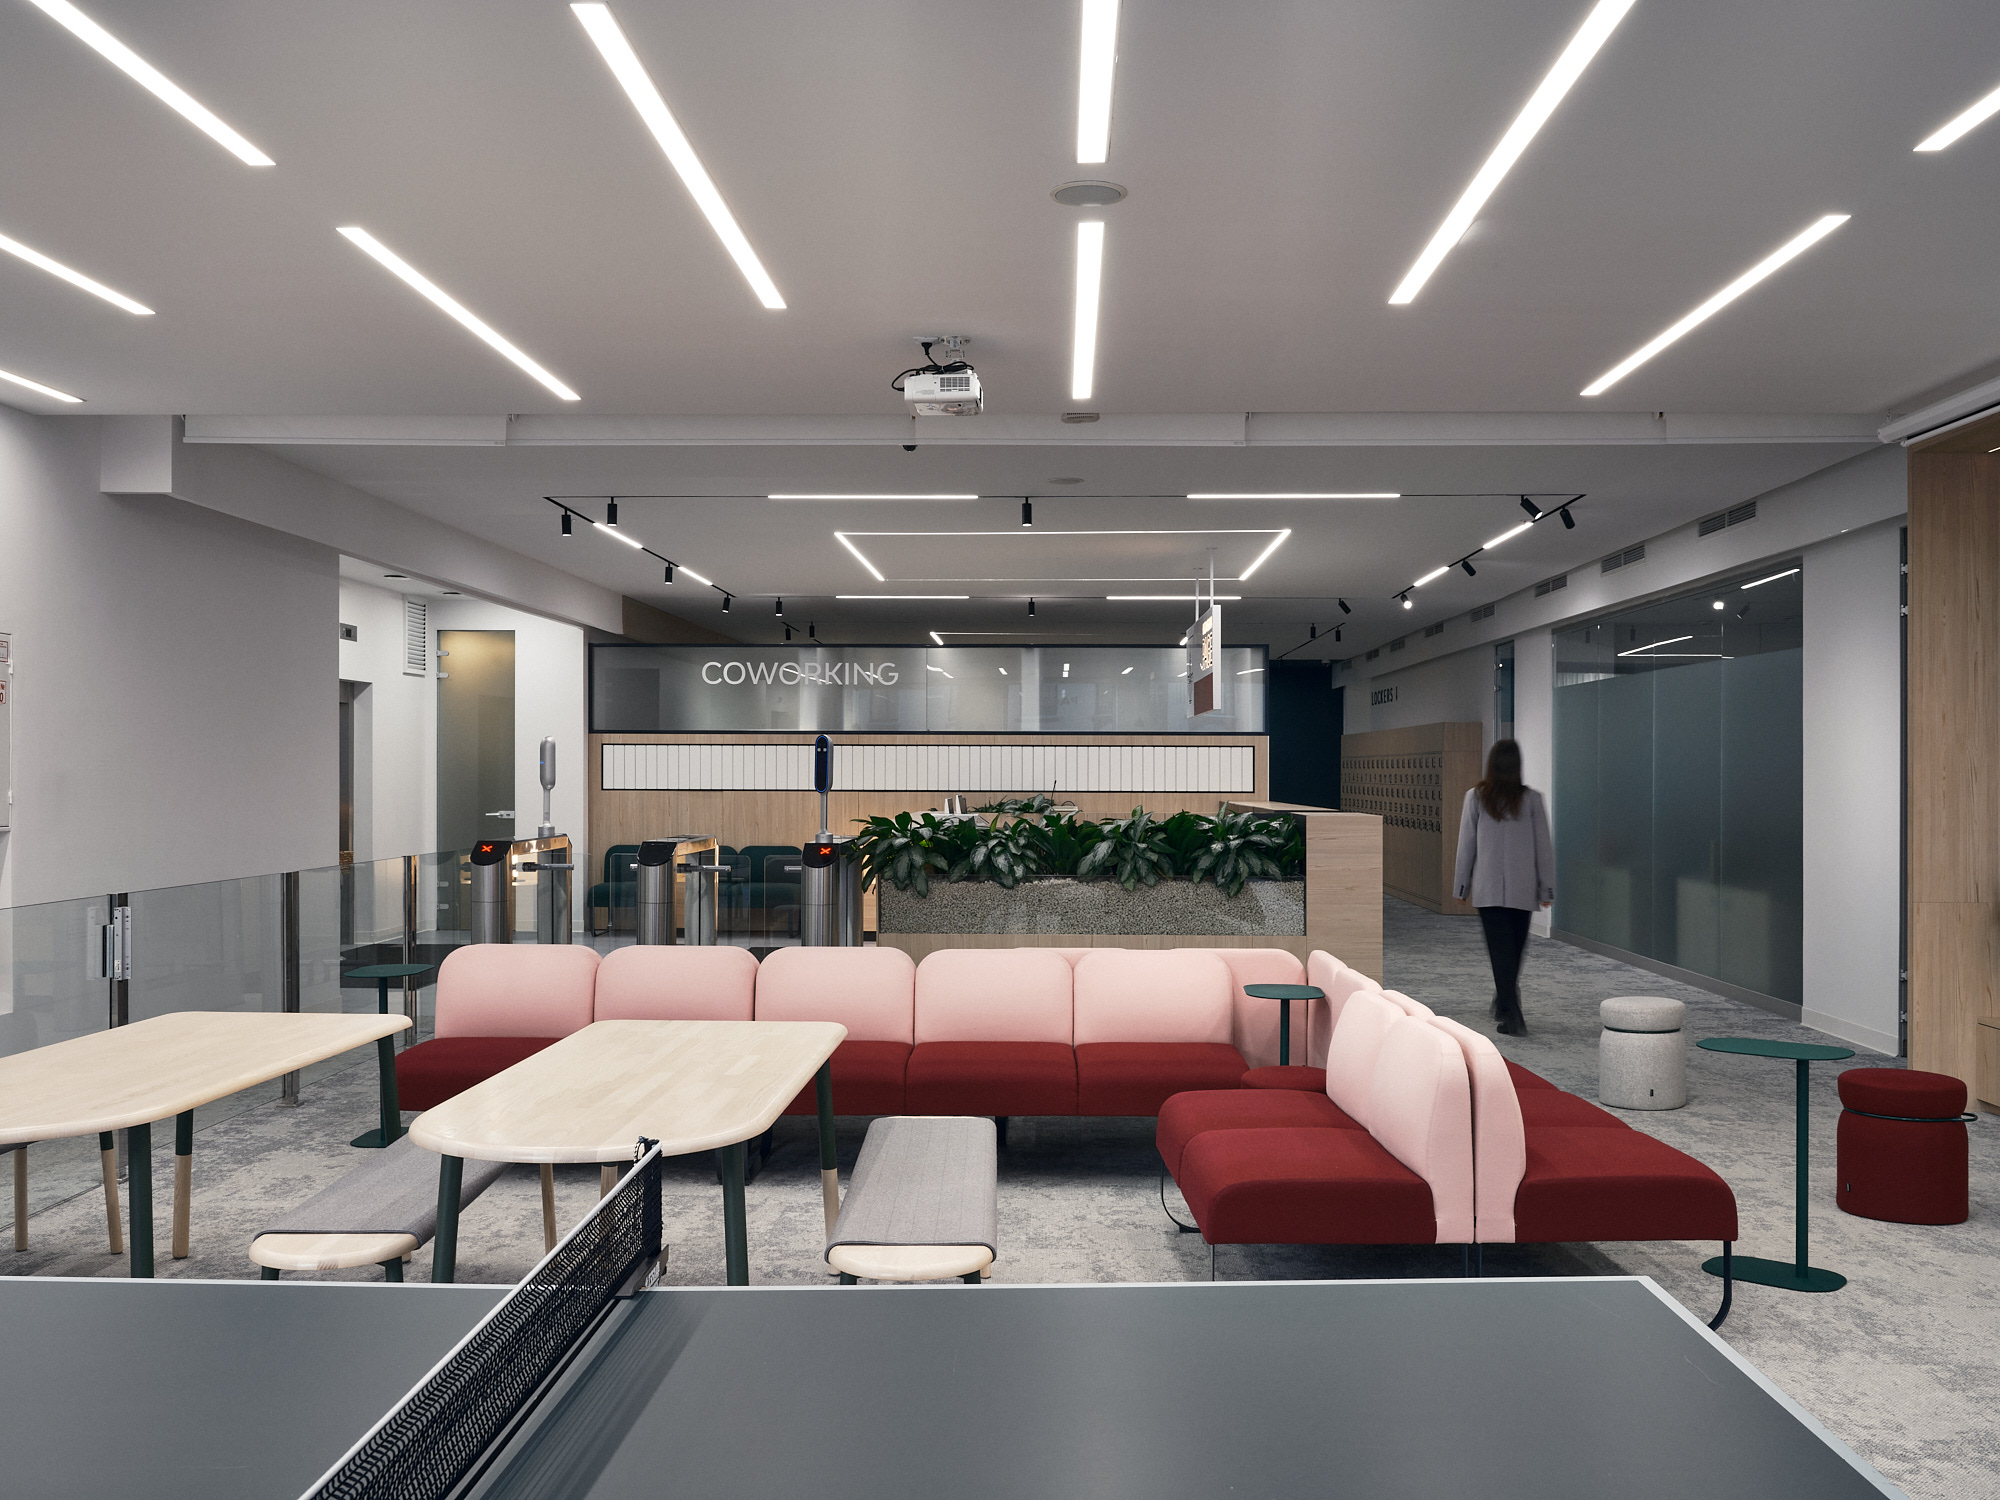 Kazanskaya PAGE – a stylish co-working space in downtown St. Petersburg 